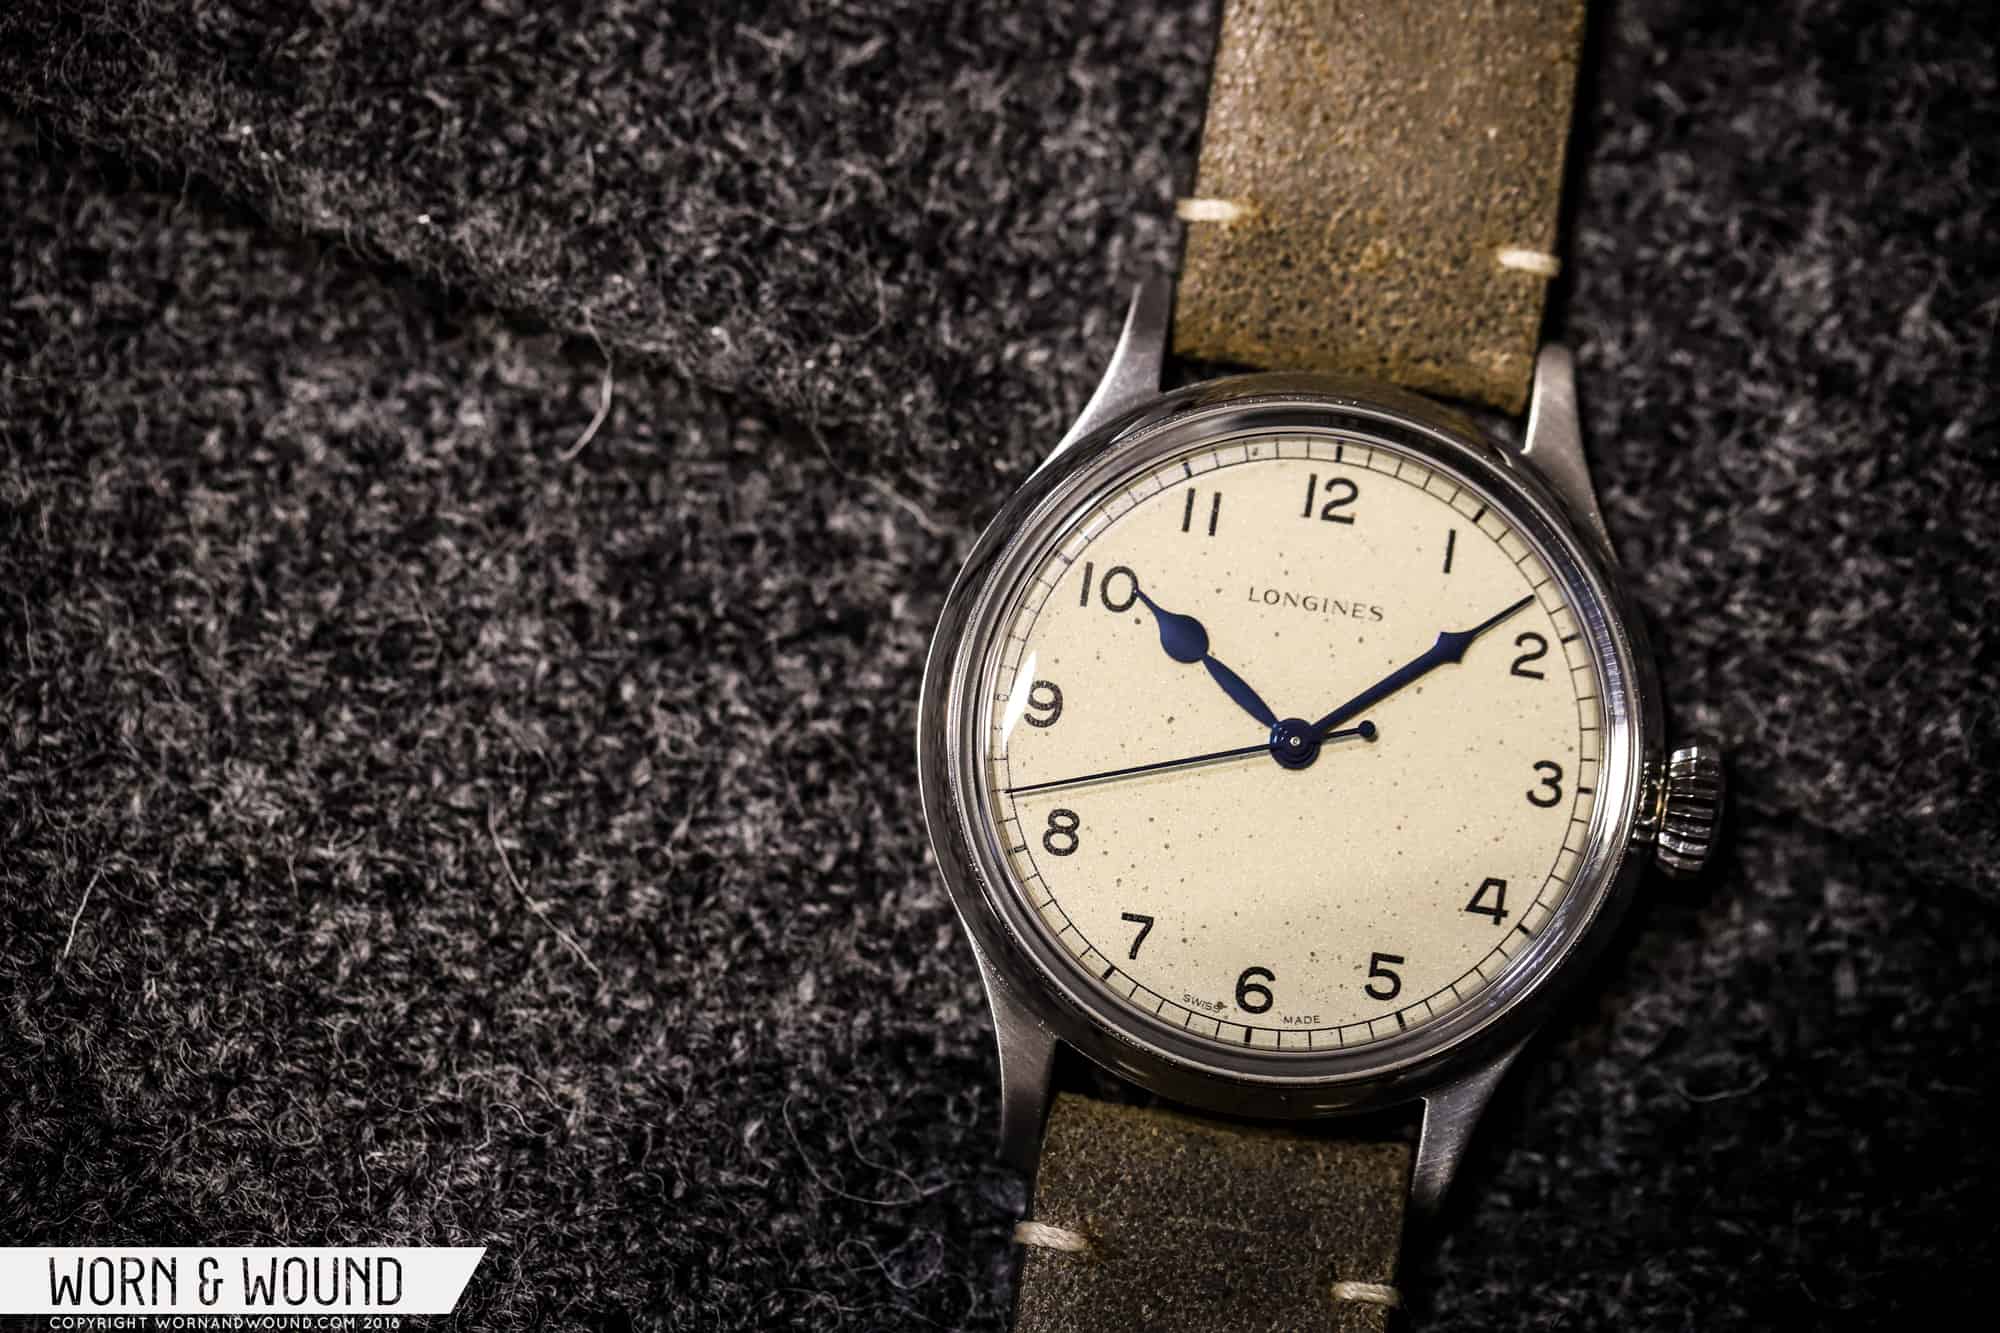 First Look: The Longines Military Watch